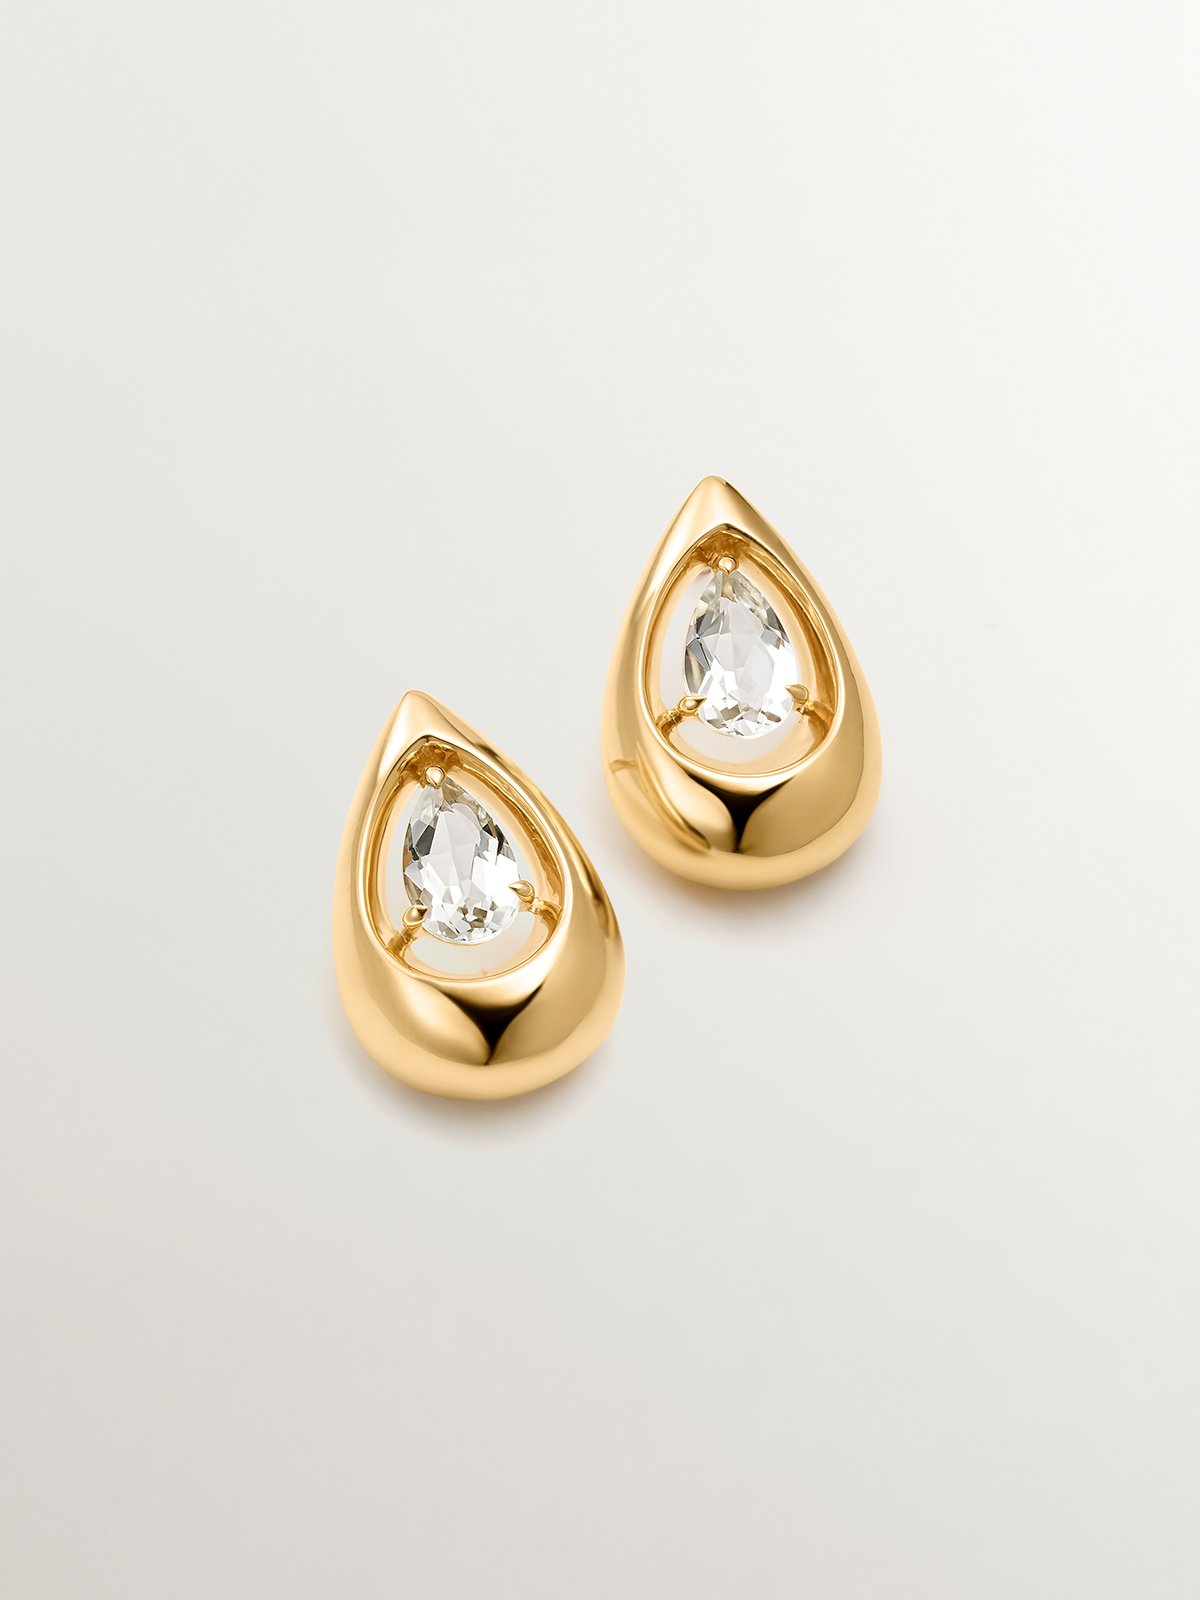 18K yellow gold plated 925 silver earrings with white topazes